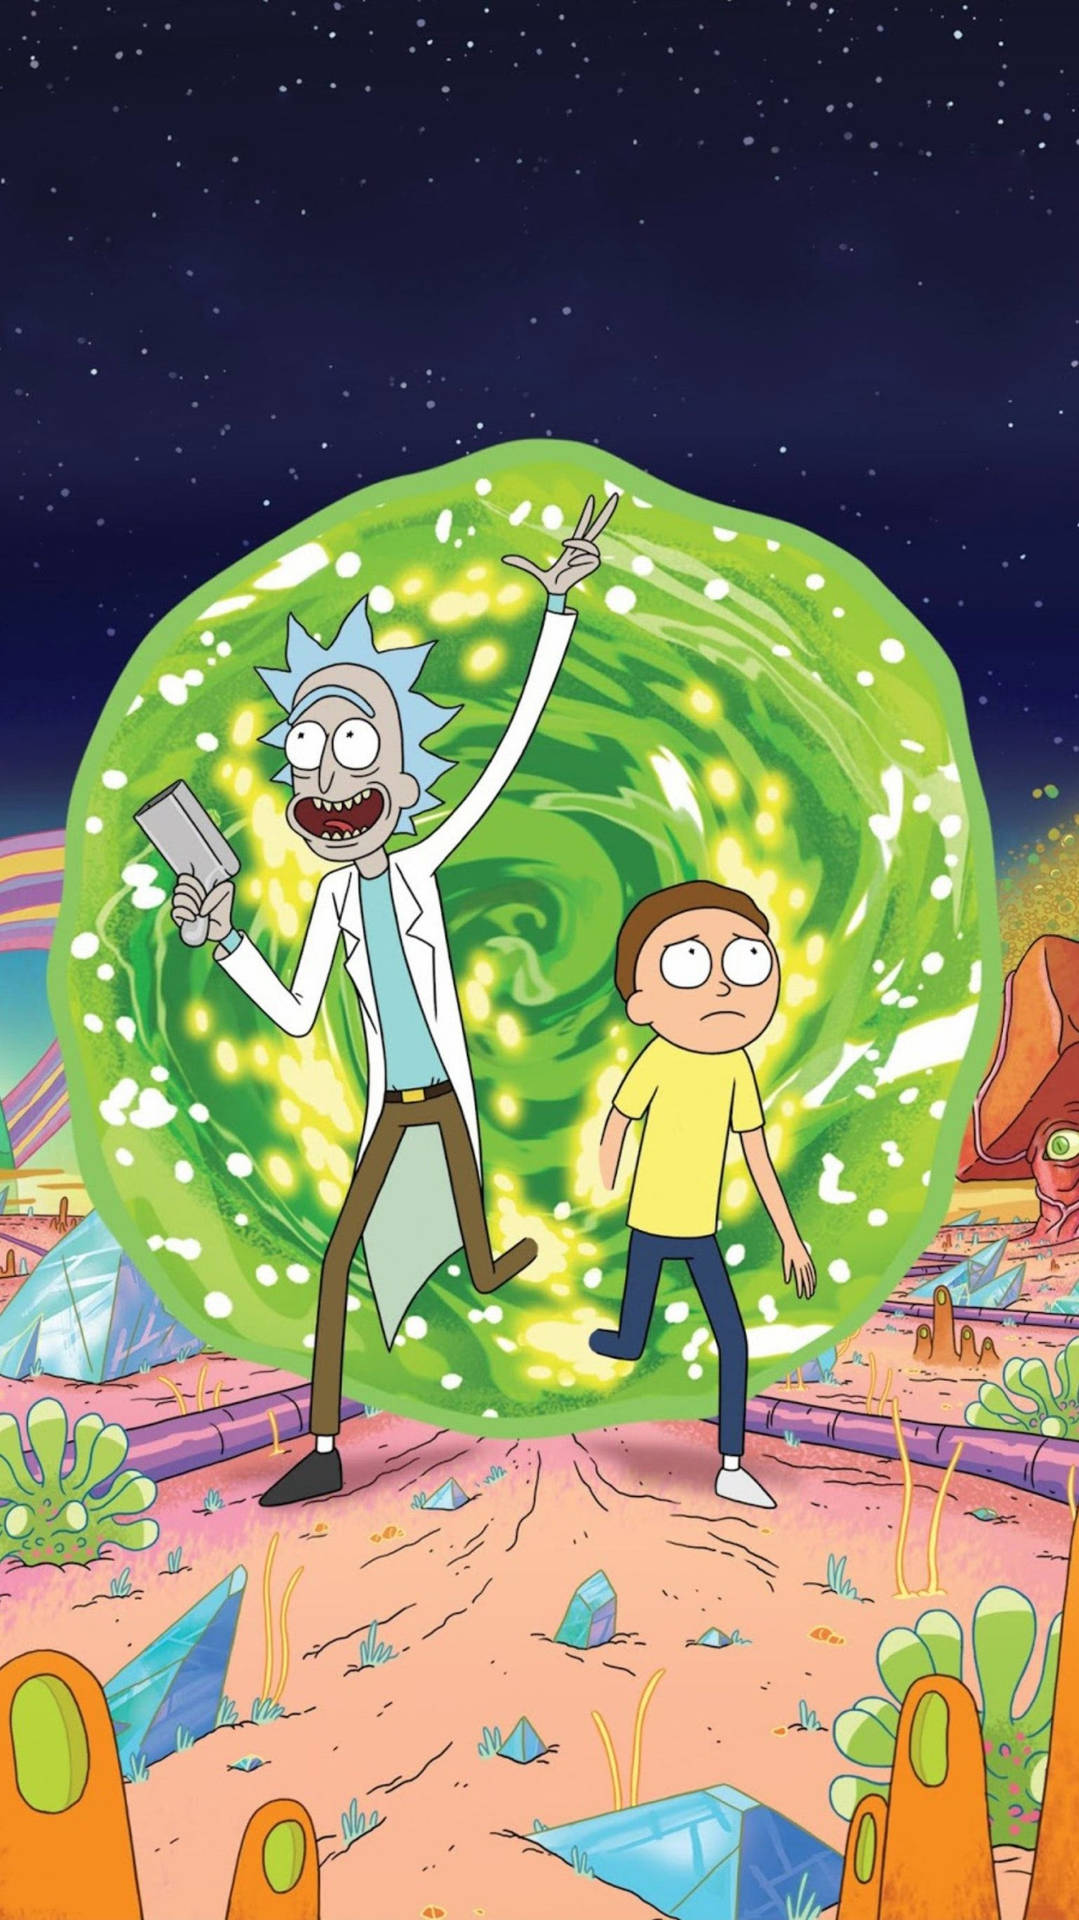 600+] Rick And Morty Wallpapers 